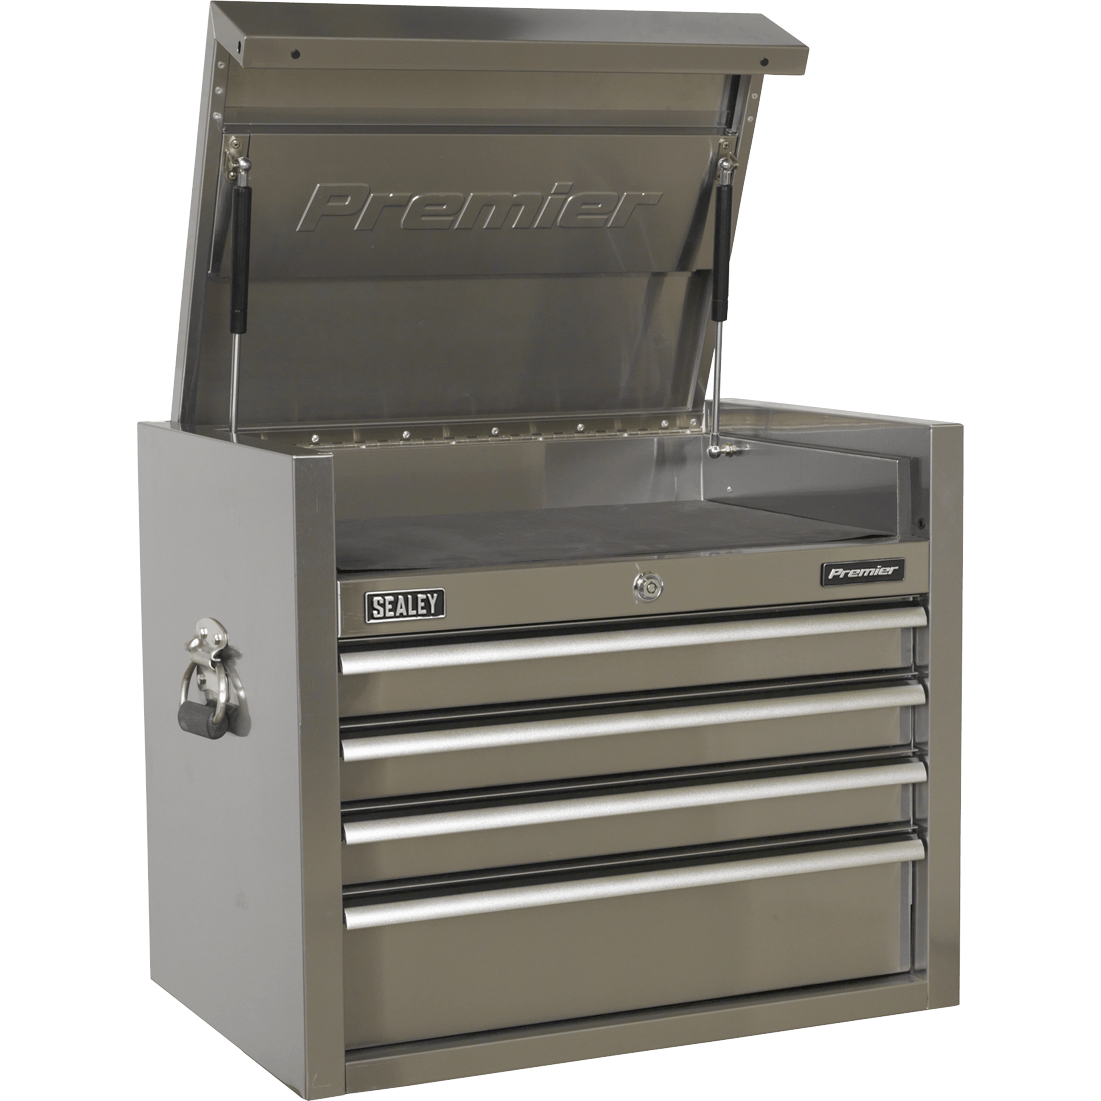 Sealey Premier 4 Drawer Stainless Steel Tool Chest Stainless Steel